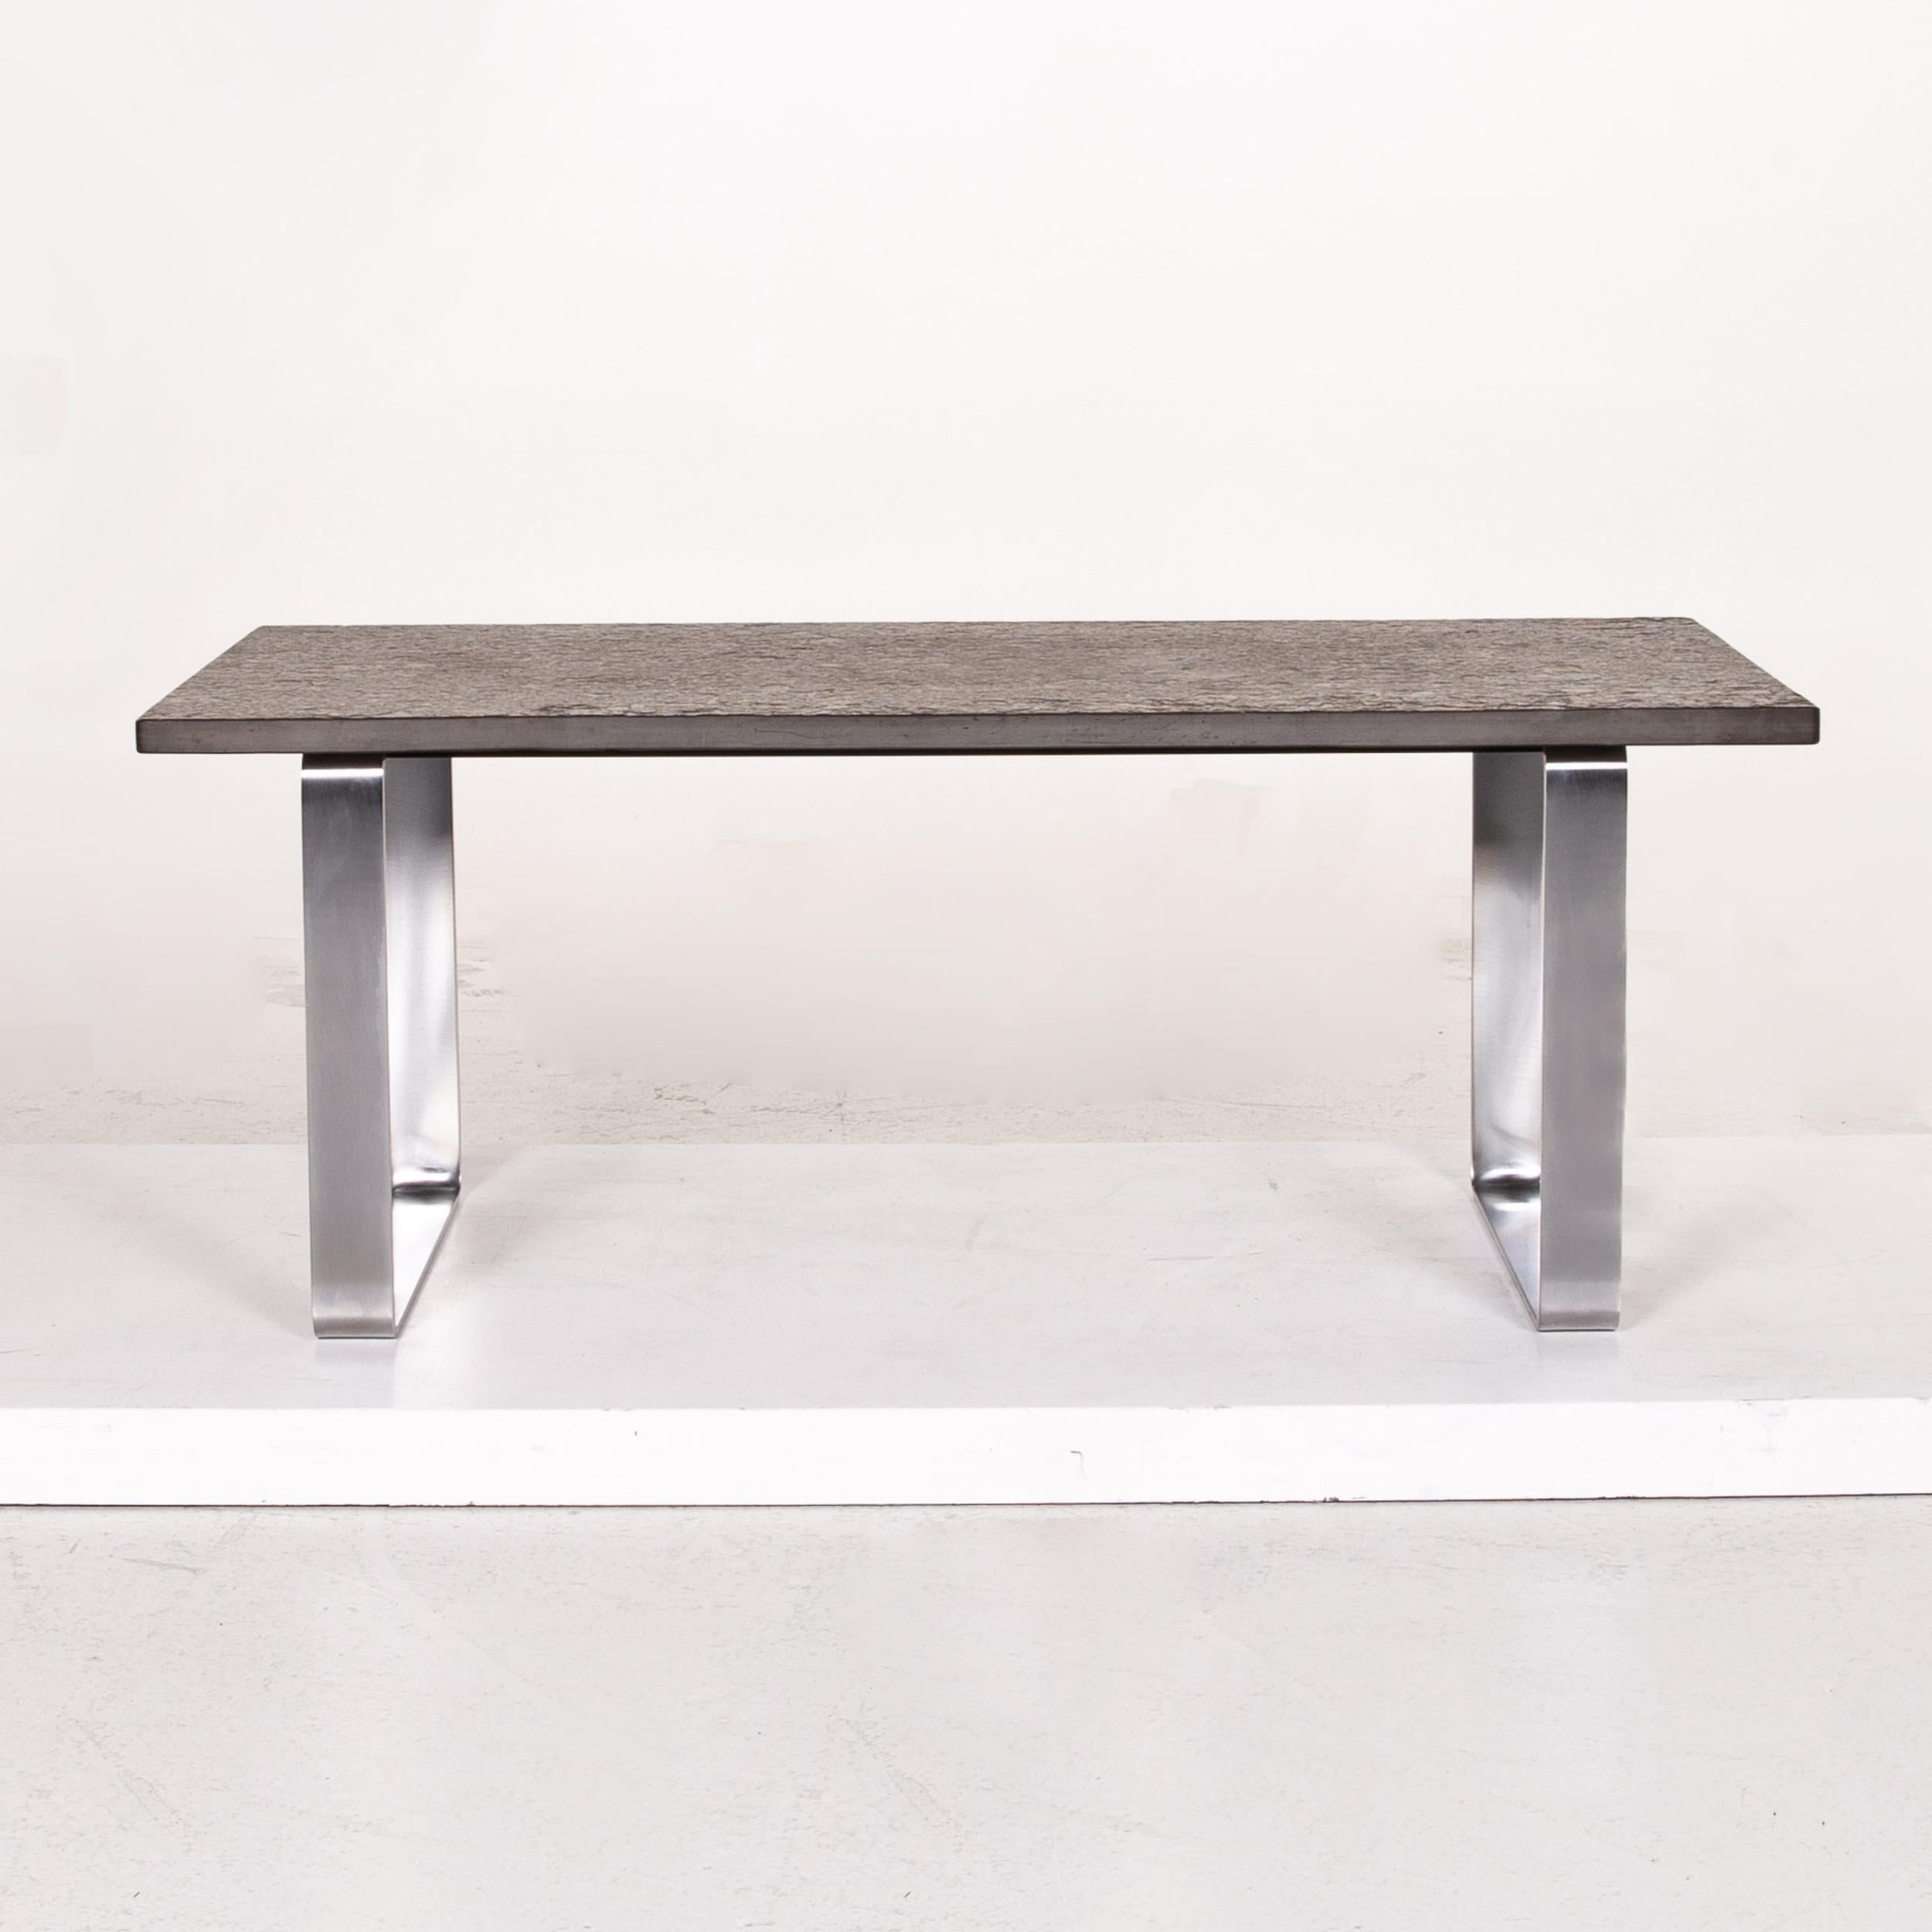 Draenert Primus Slate Coffee Table Dark Brown Anthracite Table In Excellent Condition For Sale In Cologne, DE